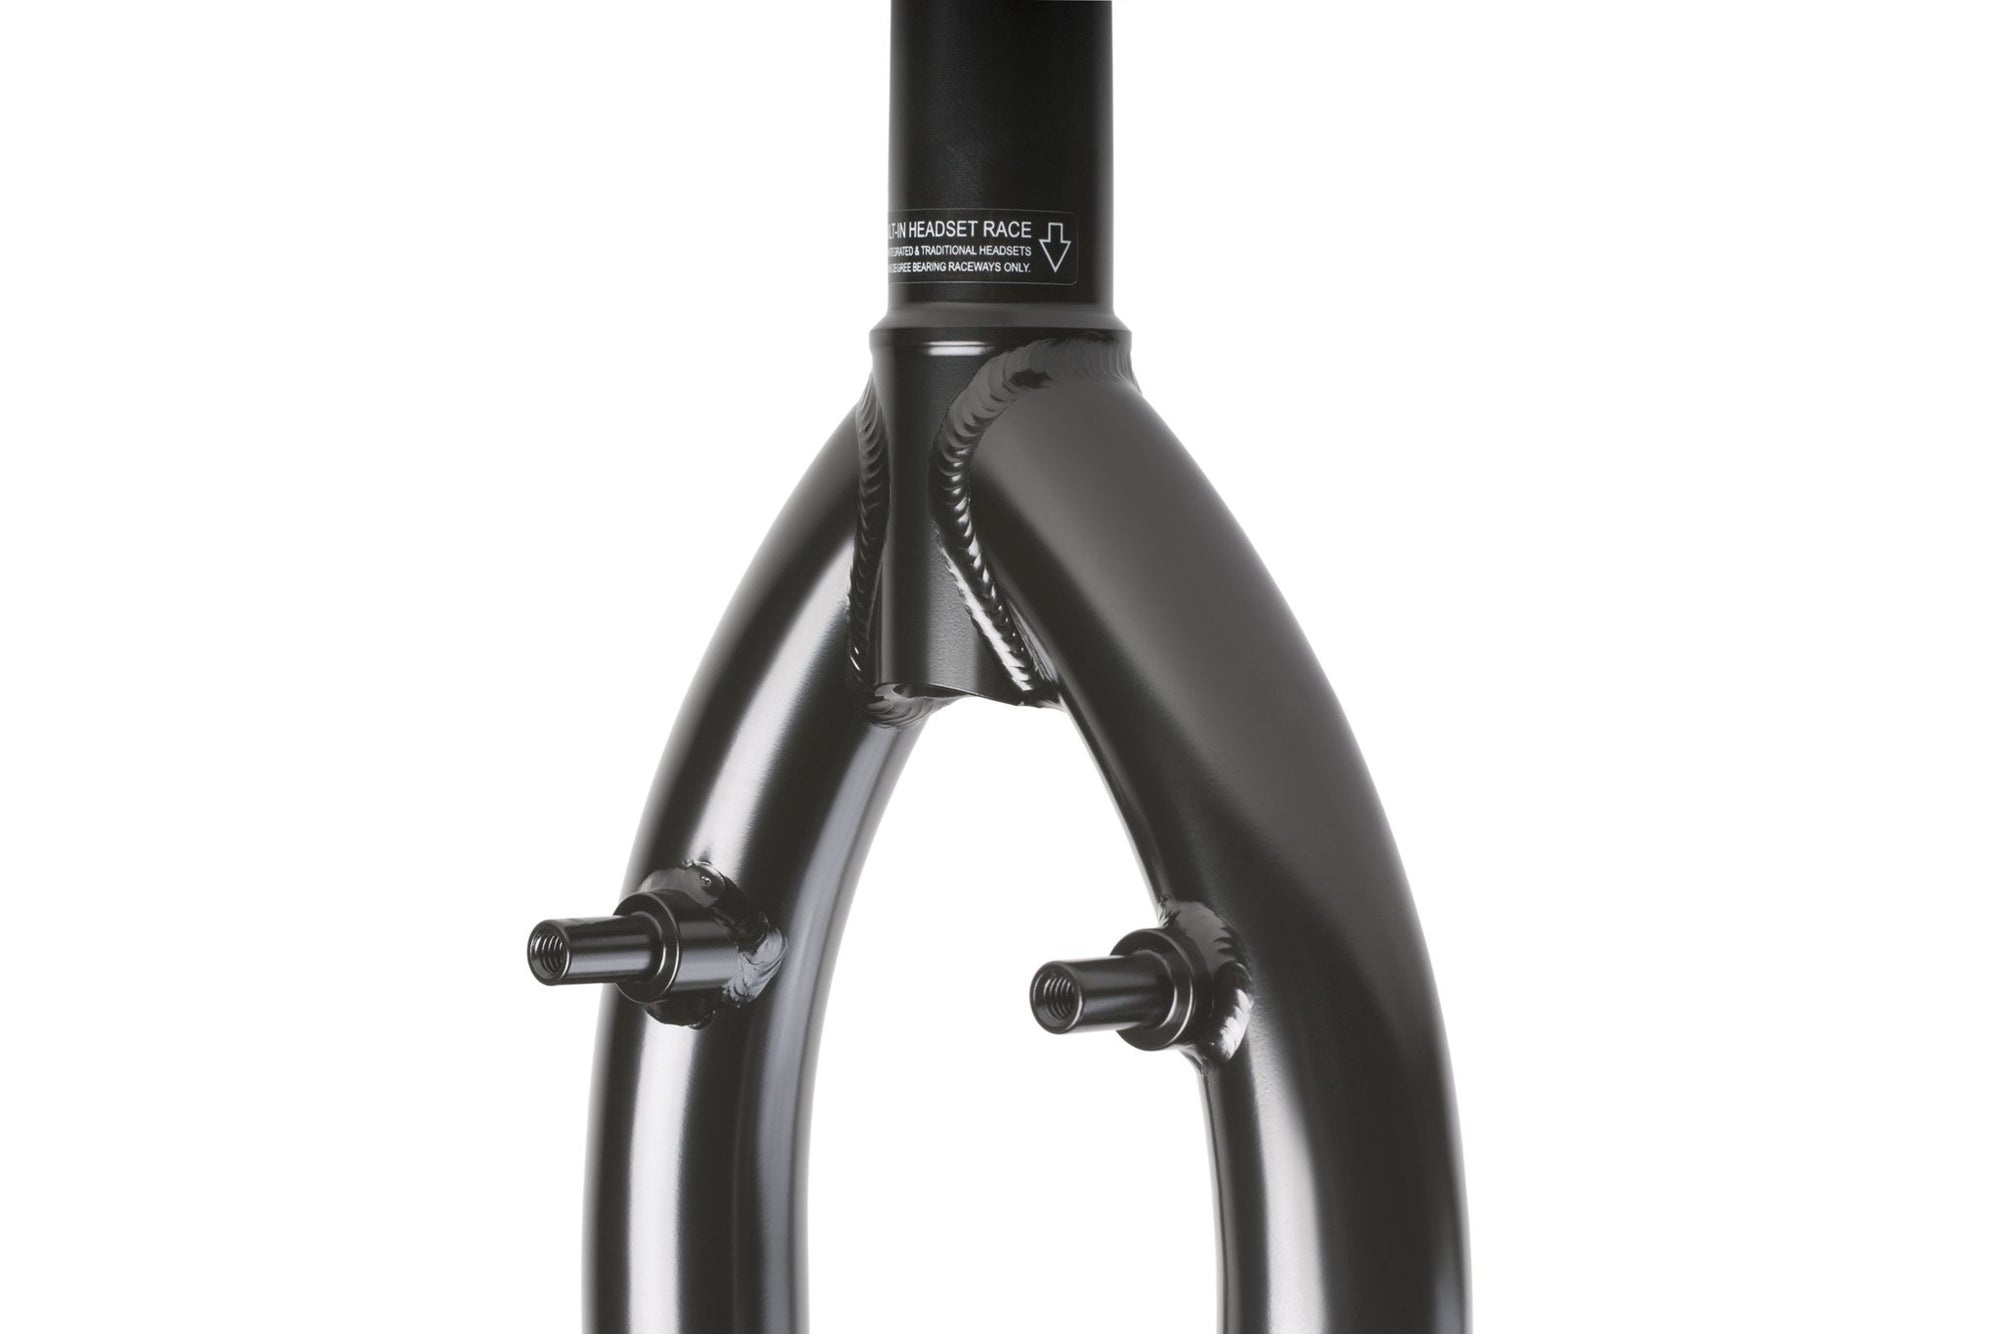 Odyssey F25 Forks (Rust Proof Black or Chrome) - Downtown Bicycle Works 